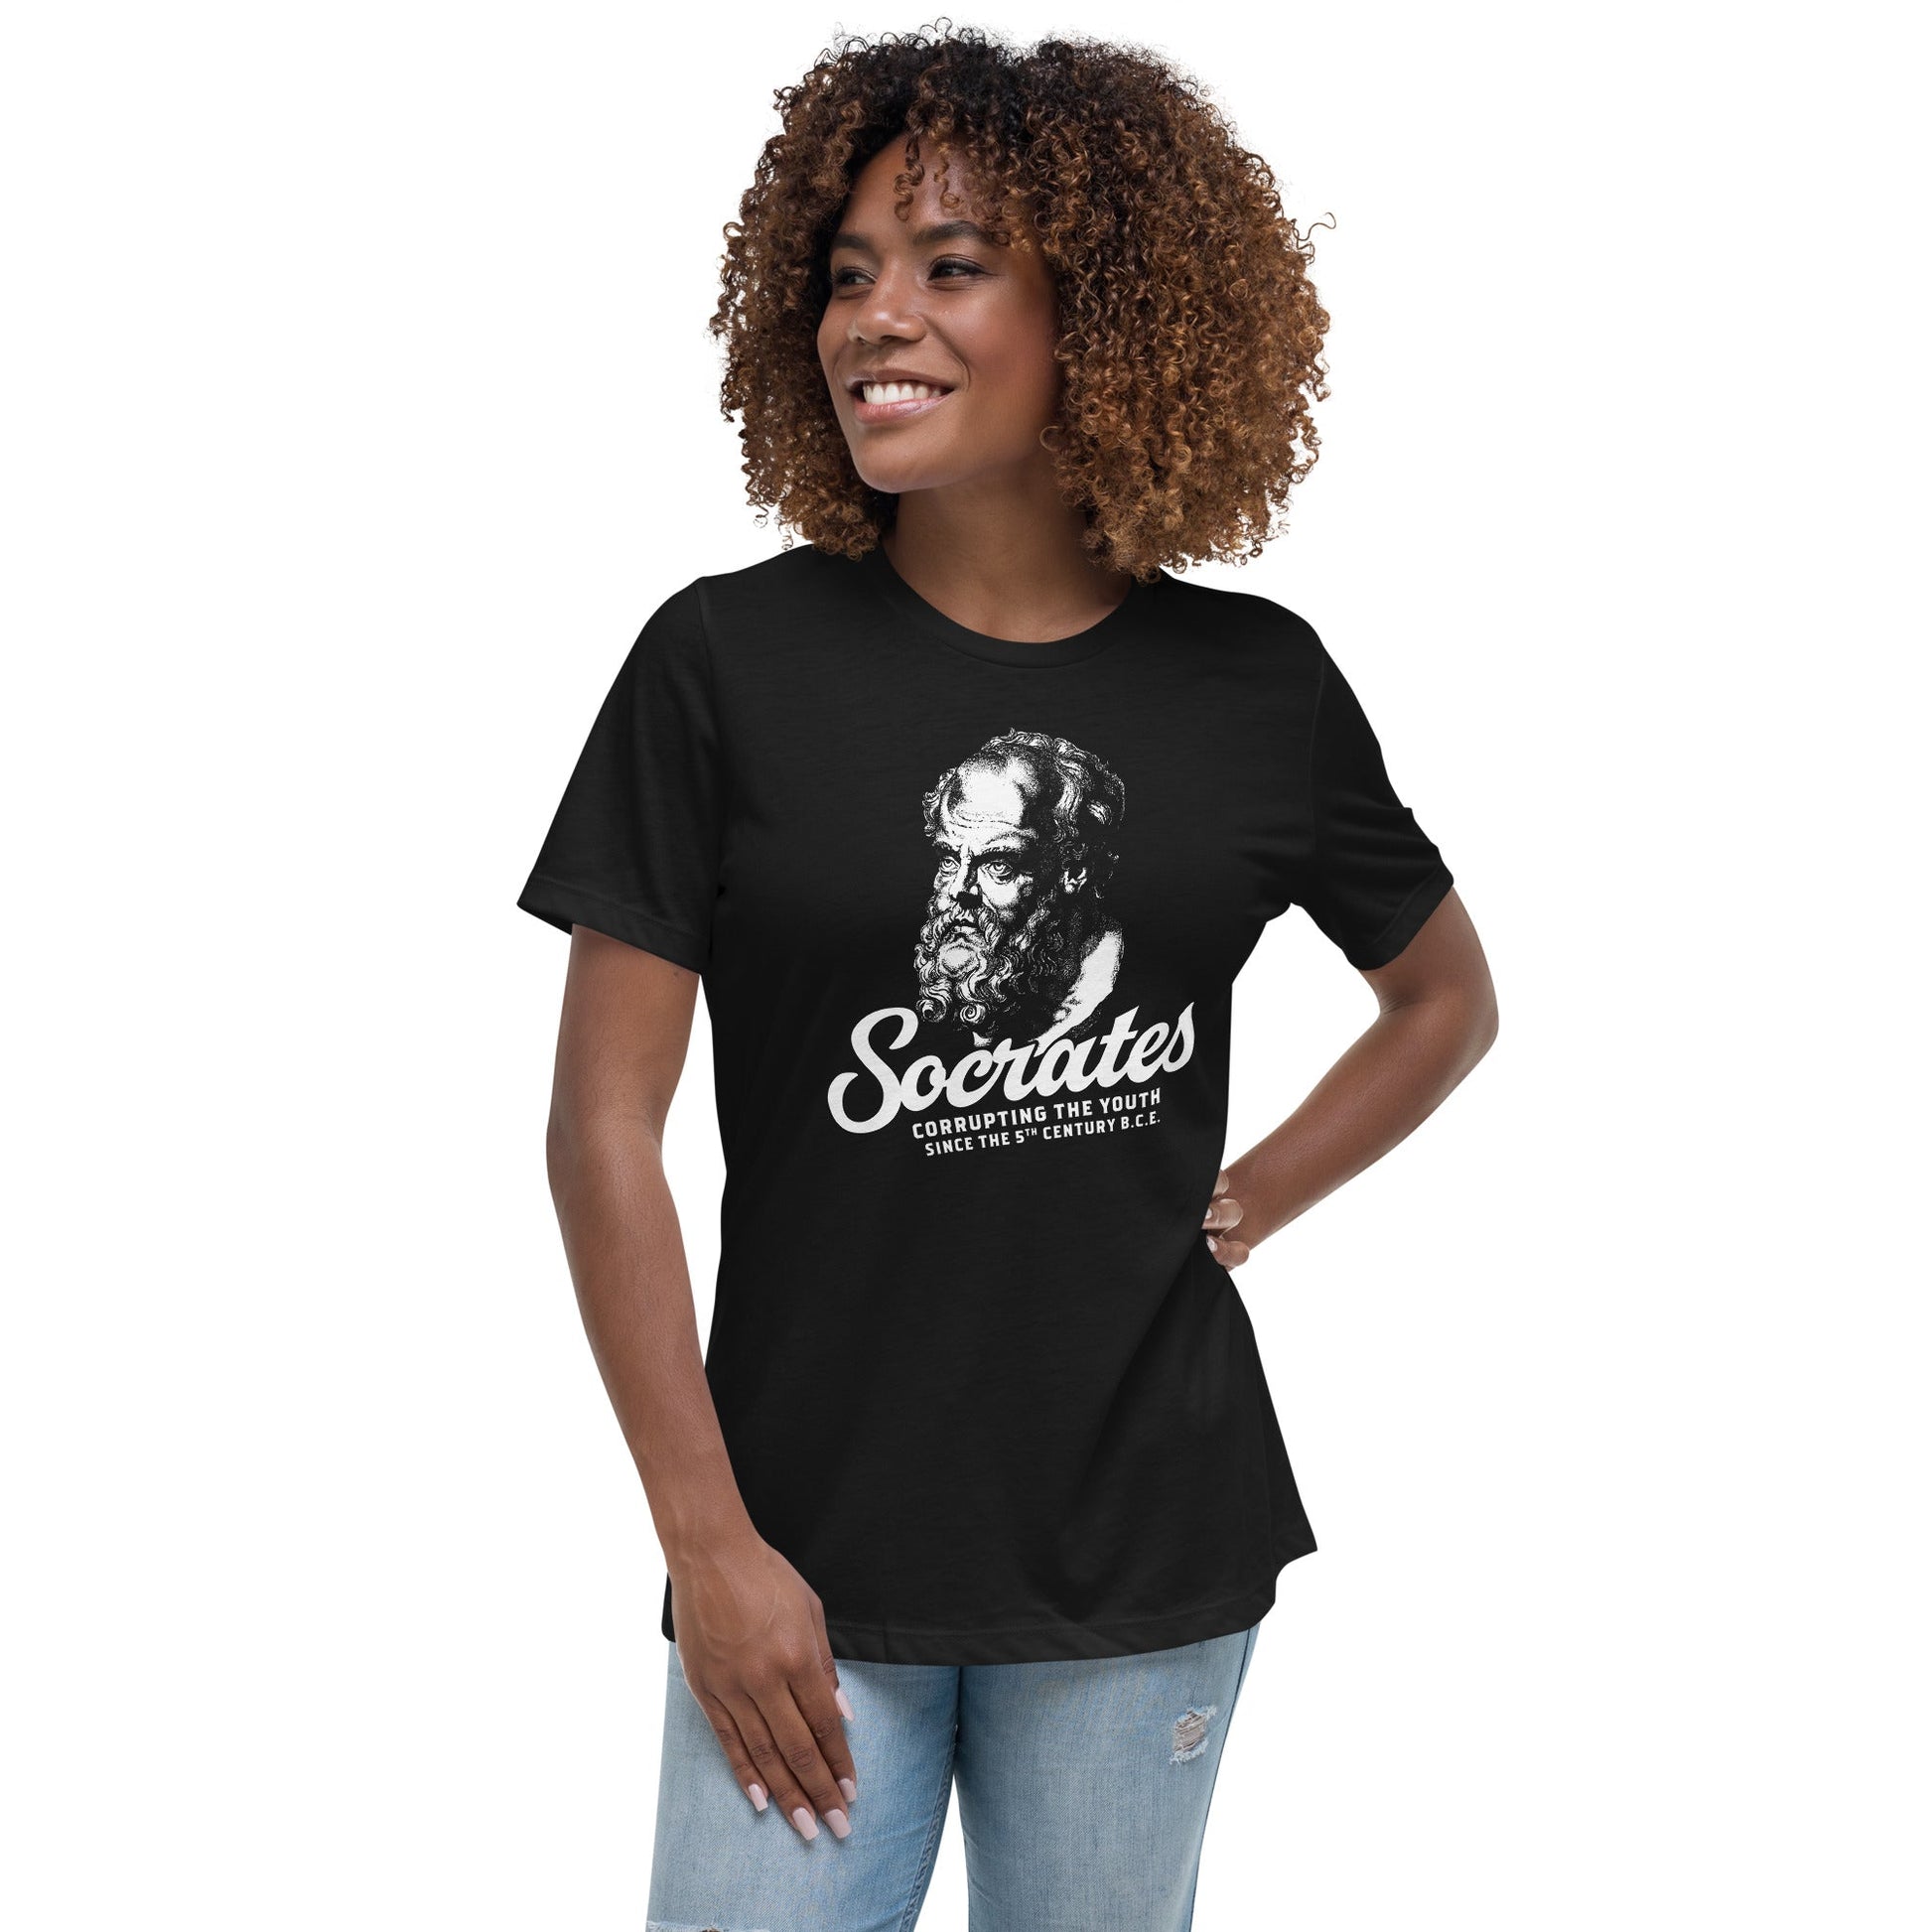 Socrates - Corrupting the youth - Women's T-Shirt